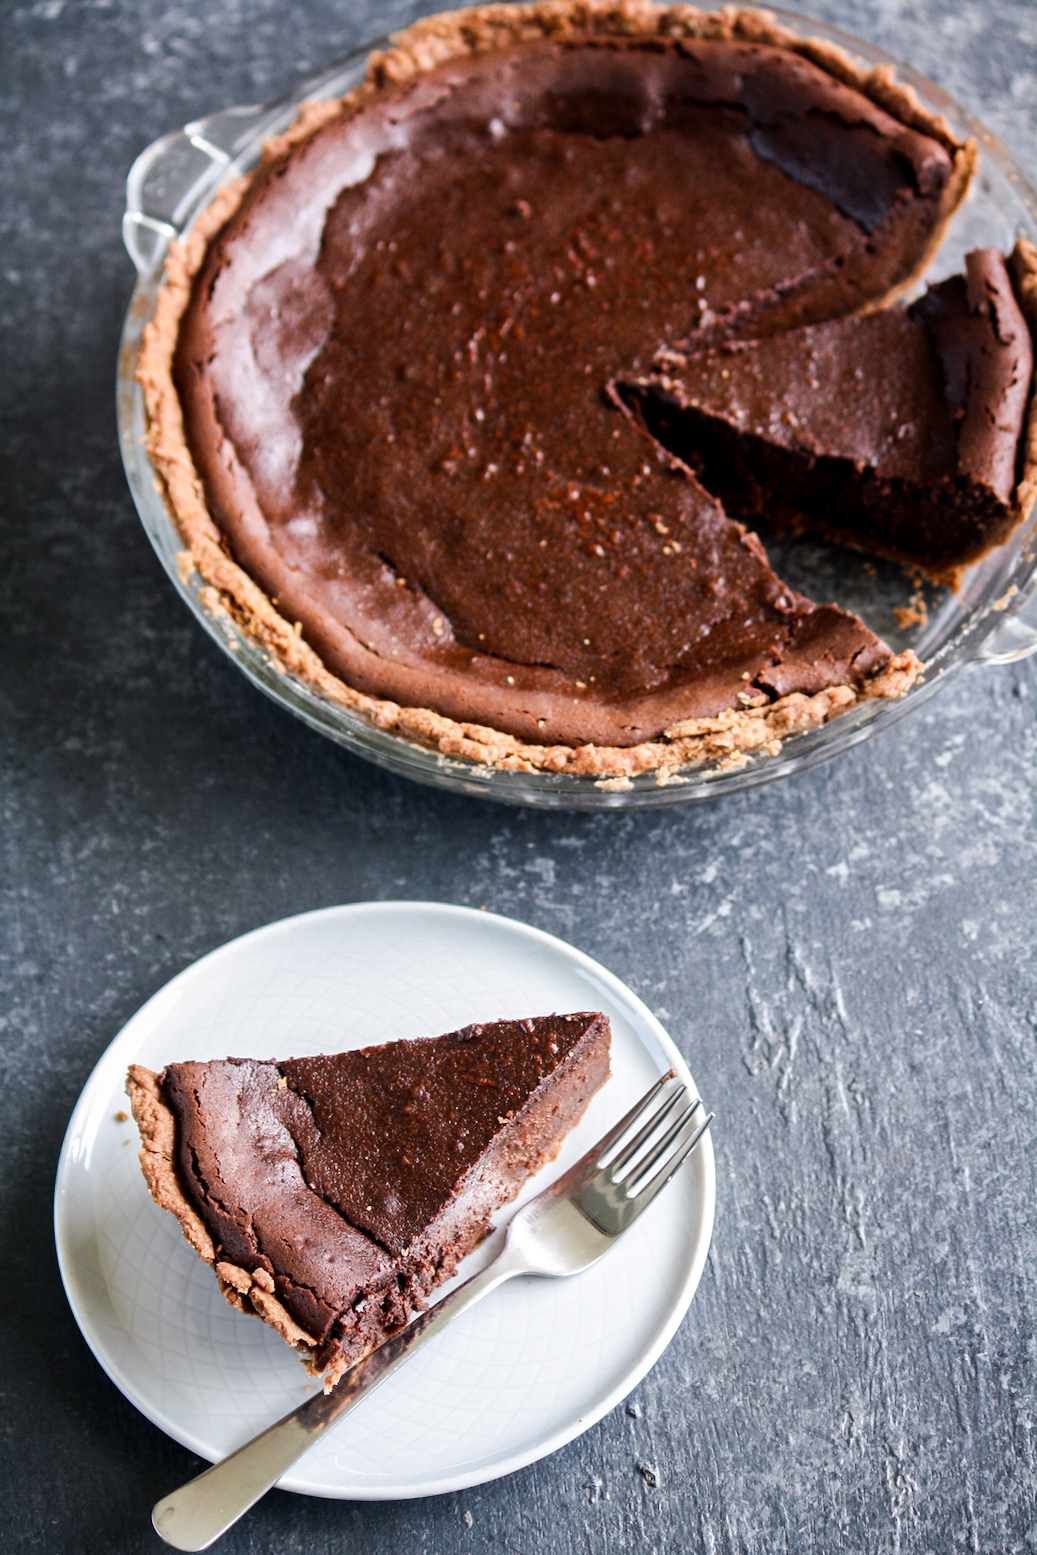 A rich, decadent chocolate and cream filling in a chocolate pie crust